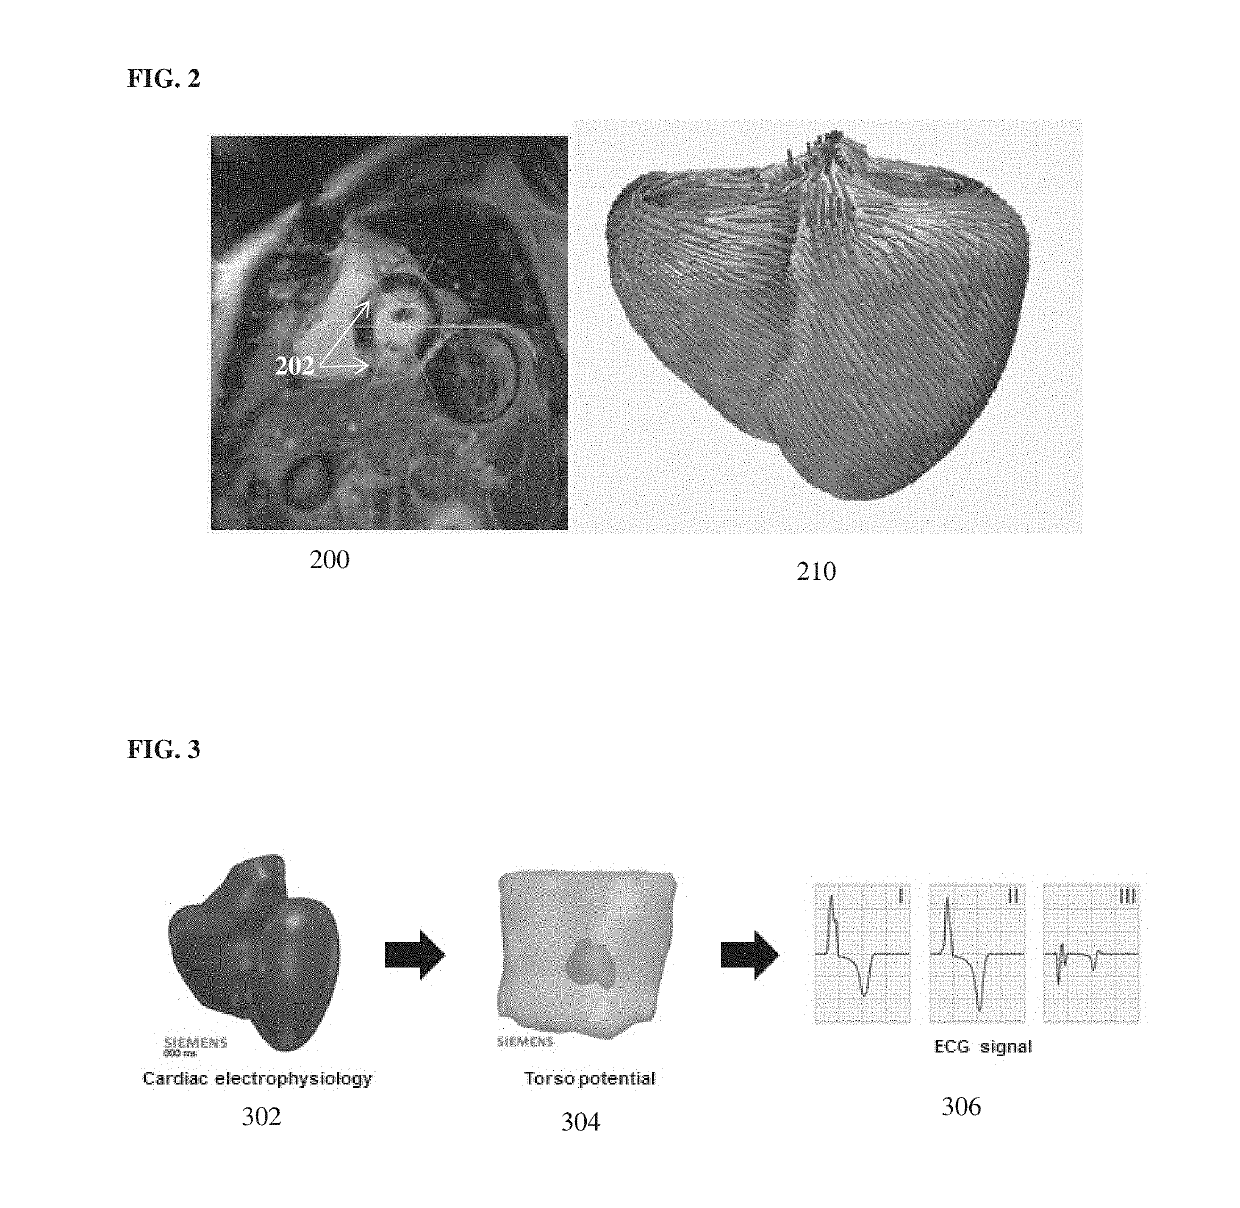 System and method for patient-specific image-based guidance of cardiac arrhythmia therapies